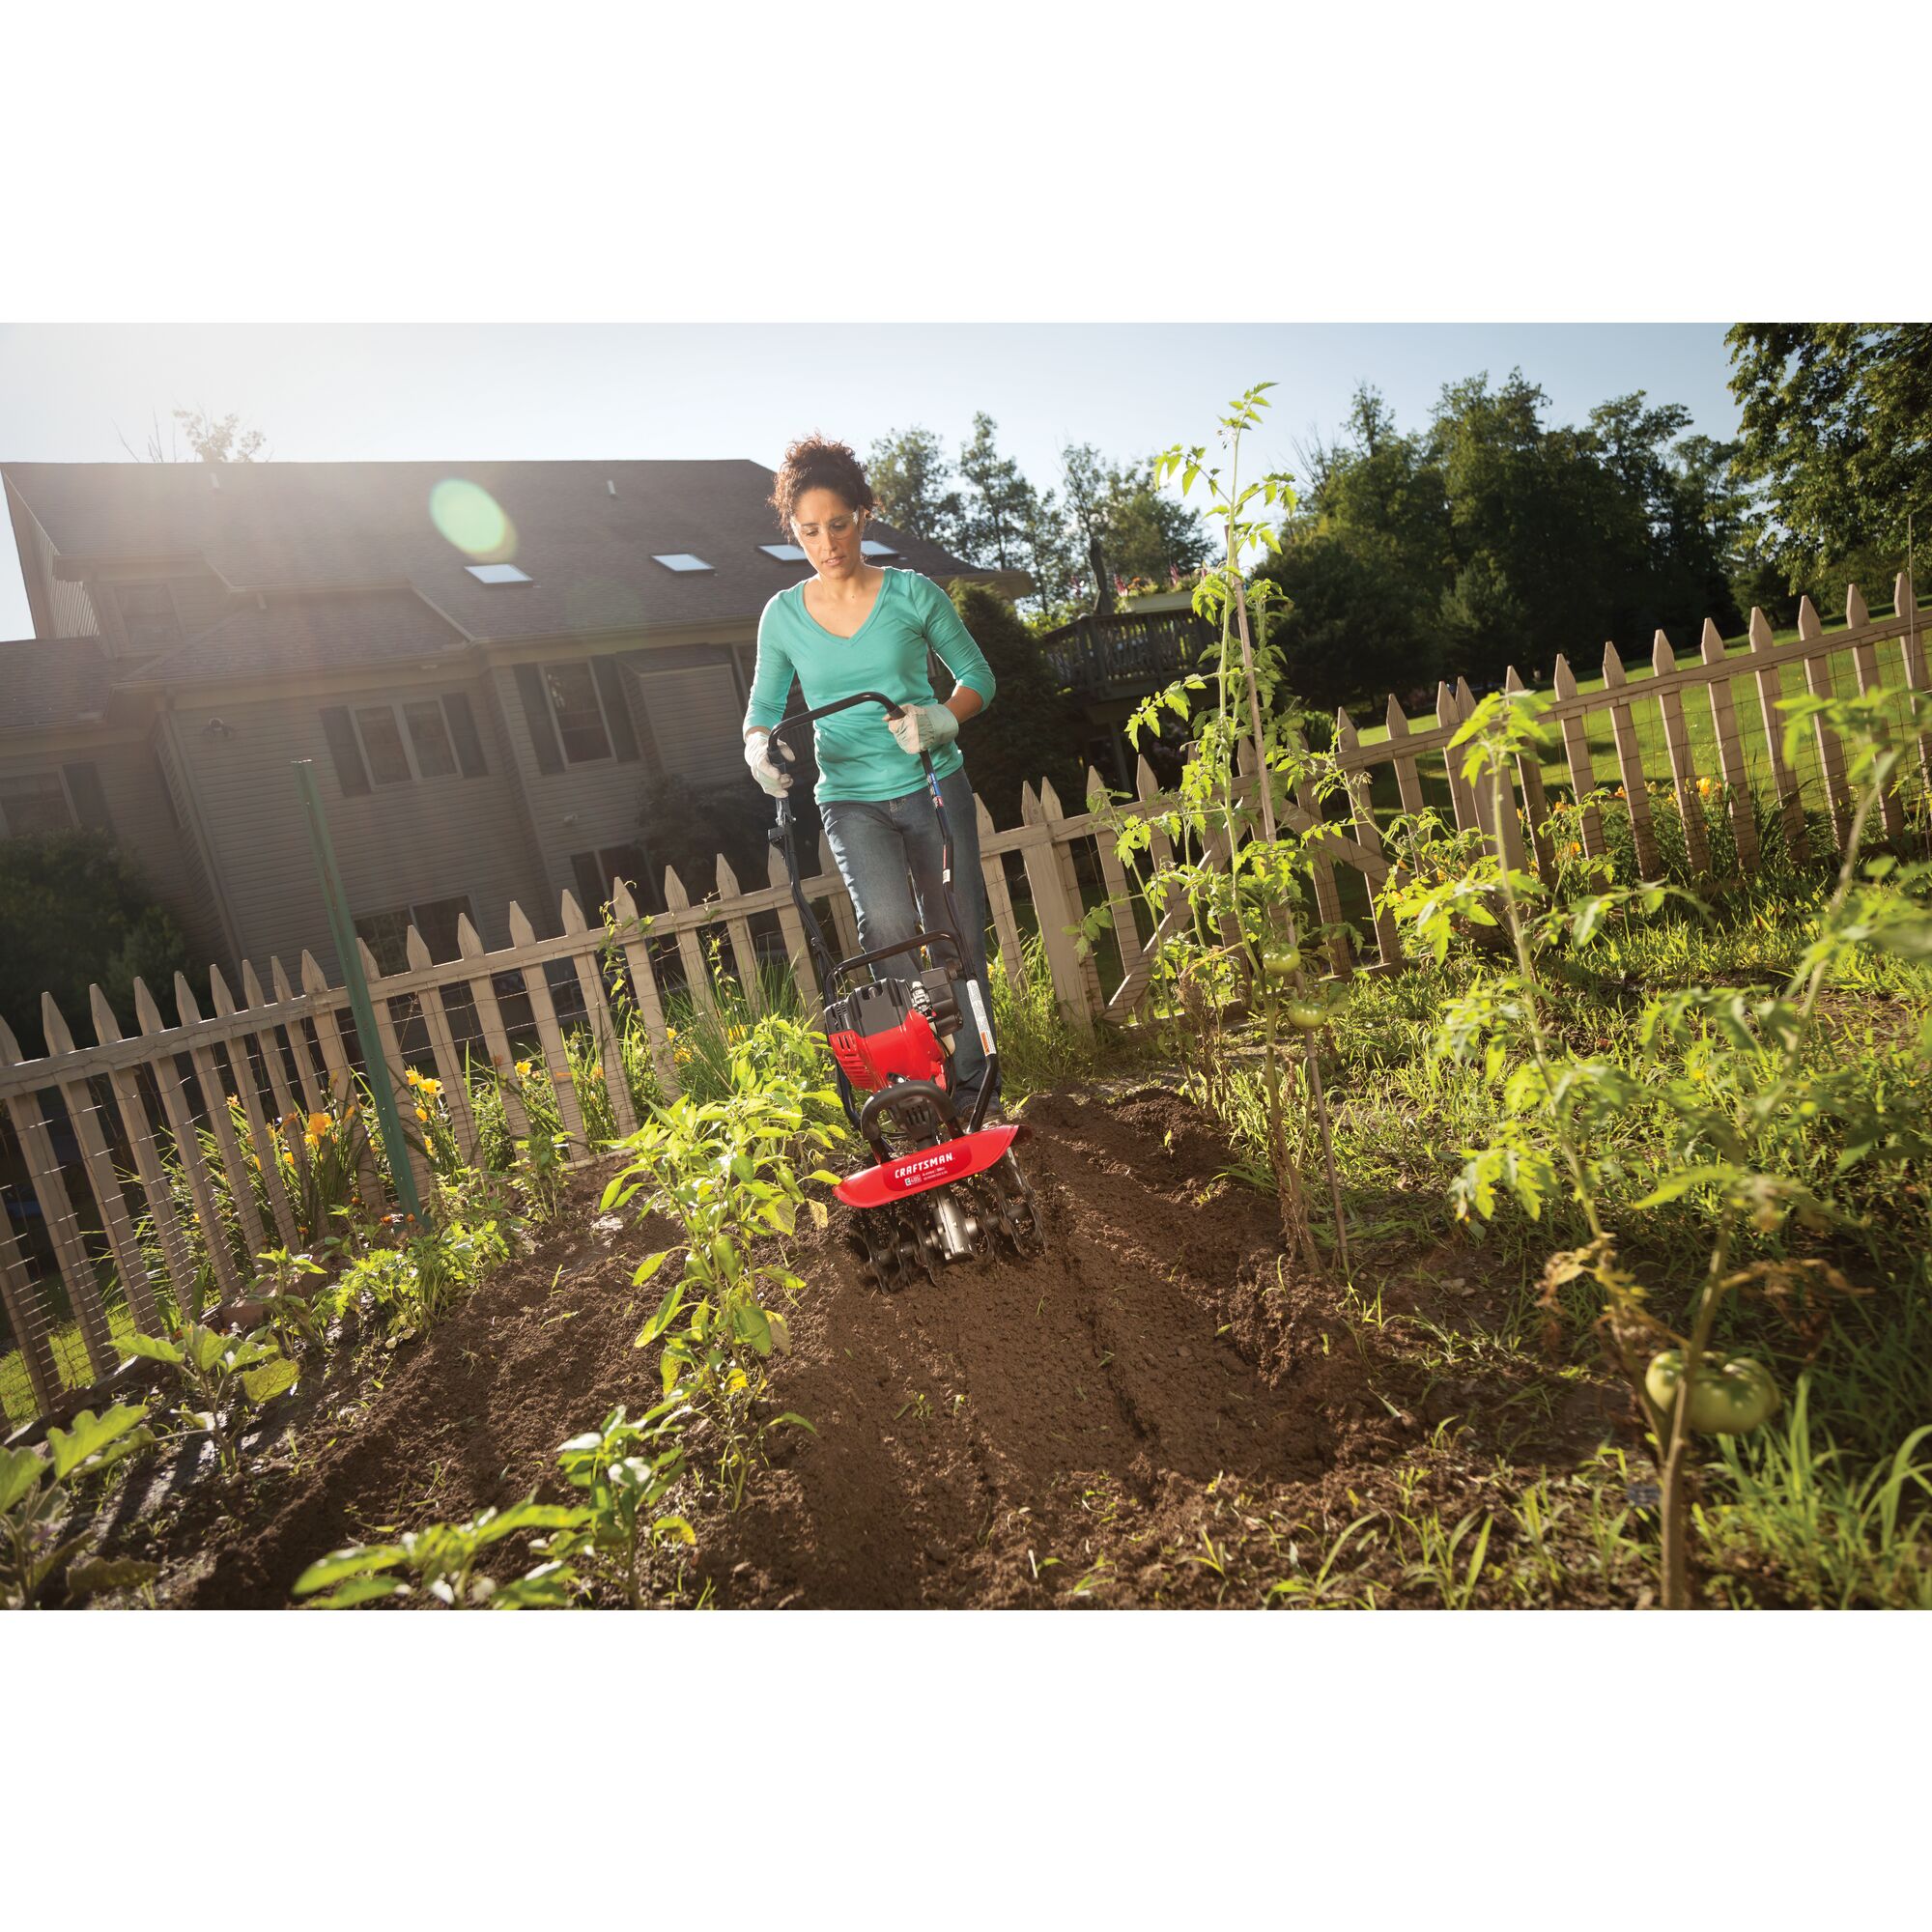 CRAFTSMAN gas cultivator in front view cultivating garden in jeans and teal shirt